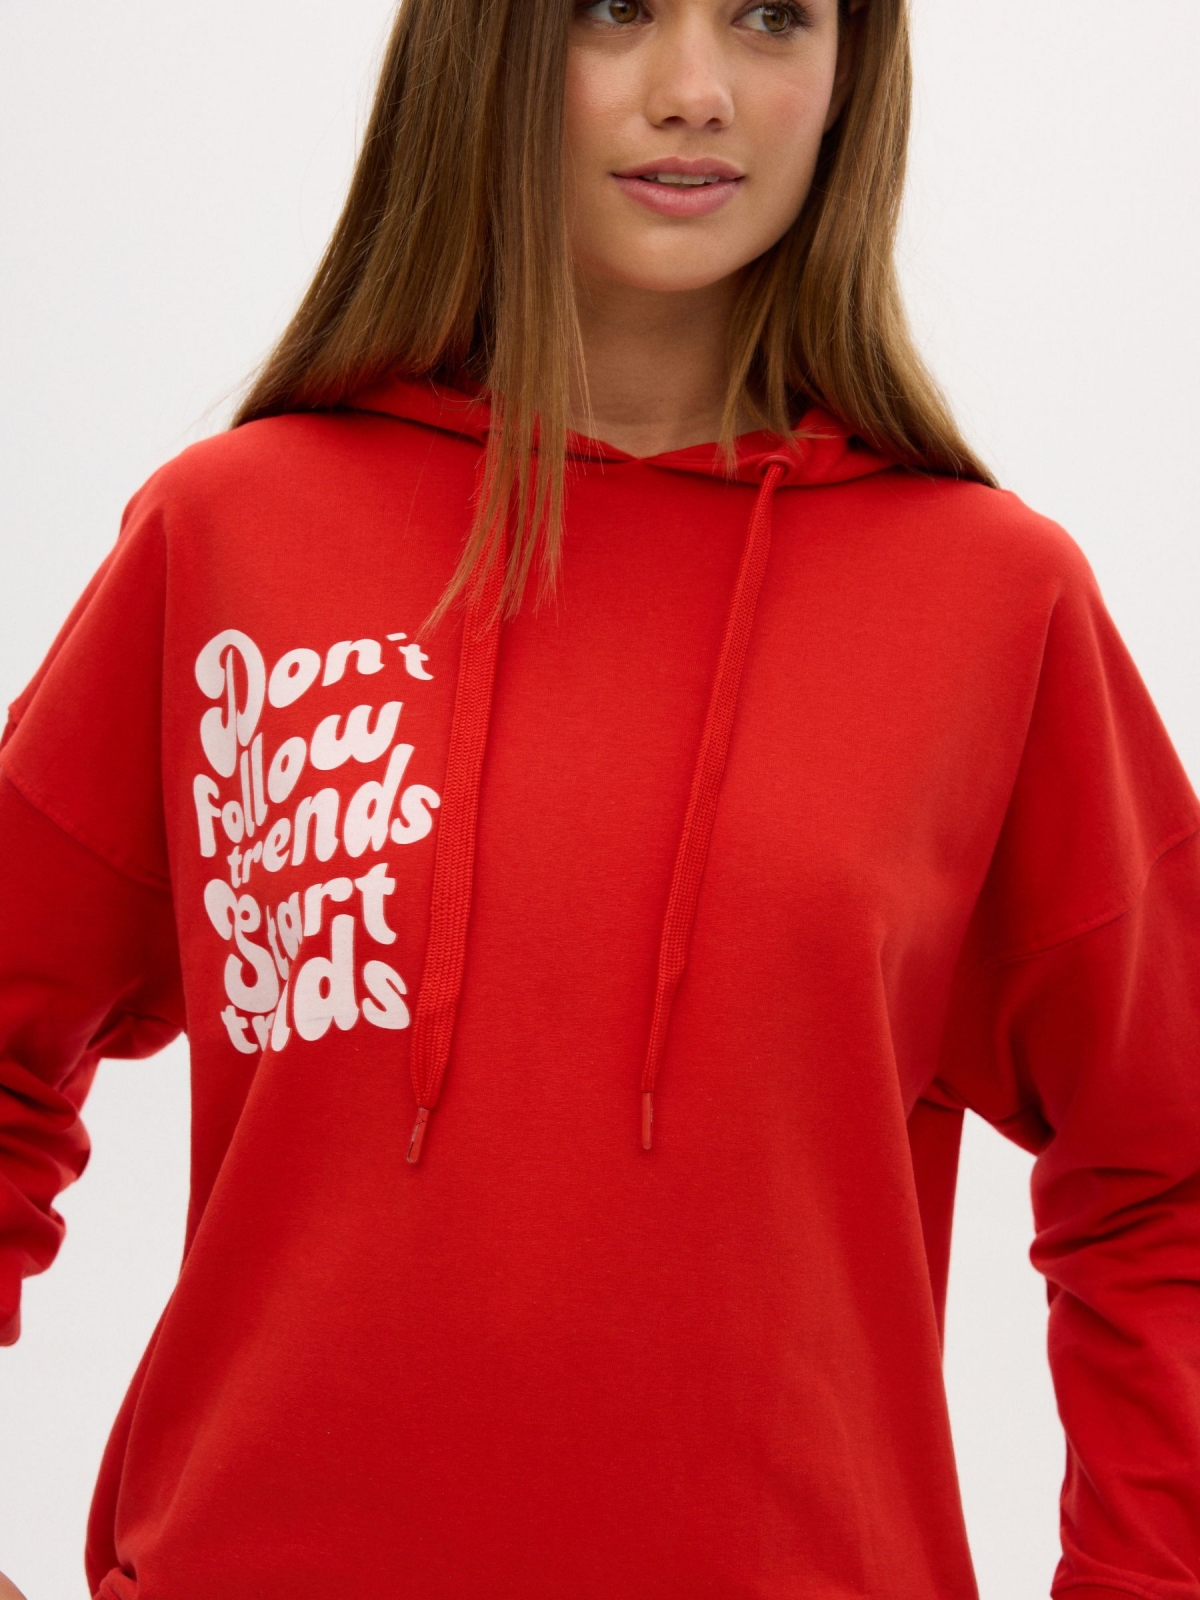 Don't Follow Trends Sweatshirt red detail view